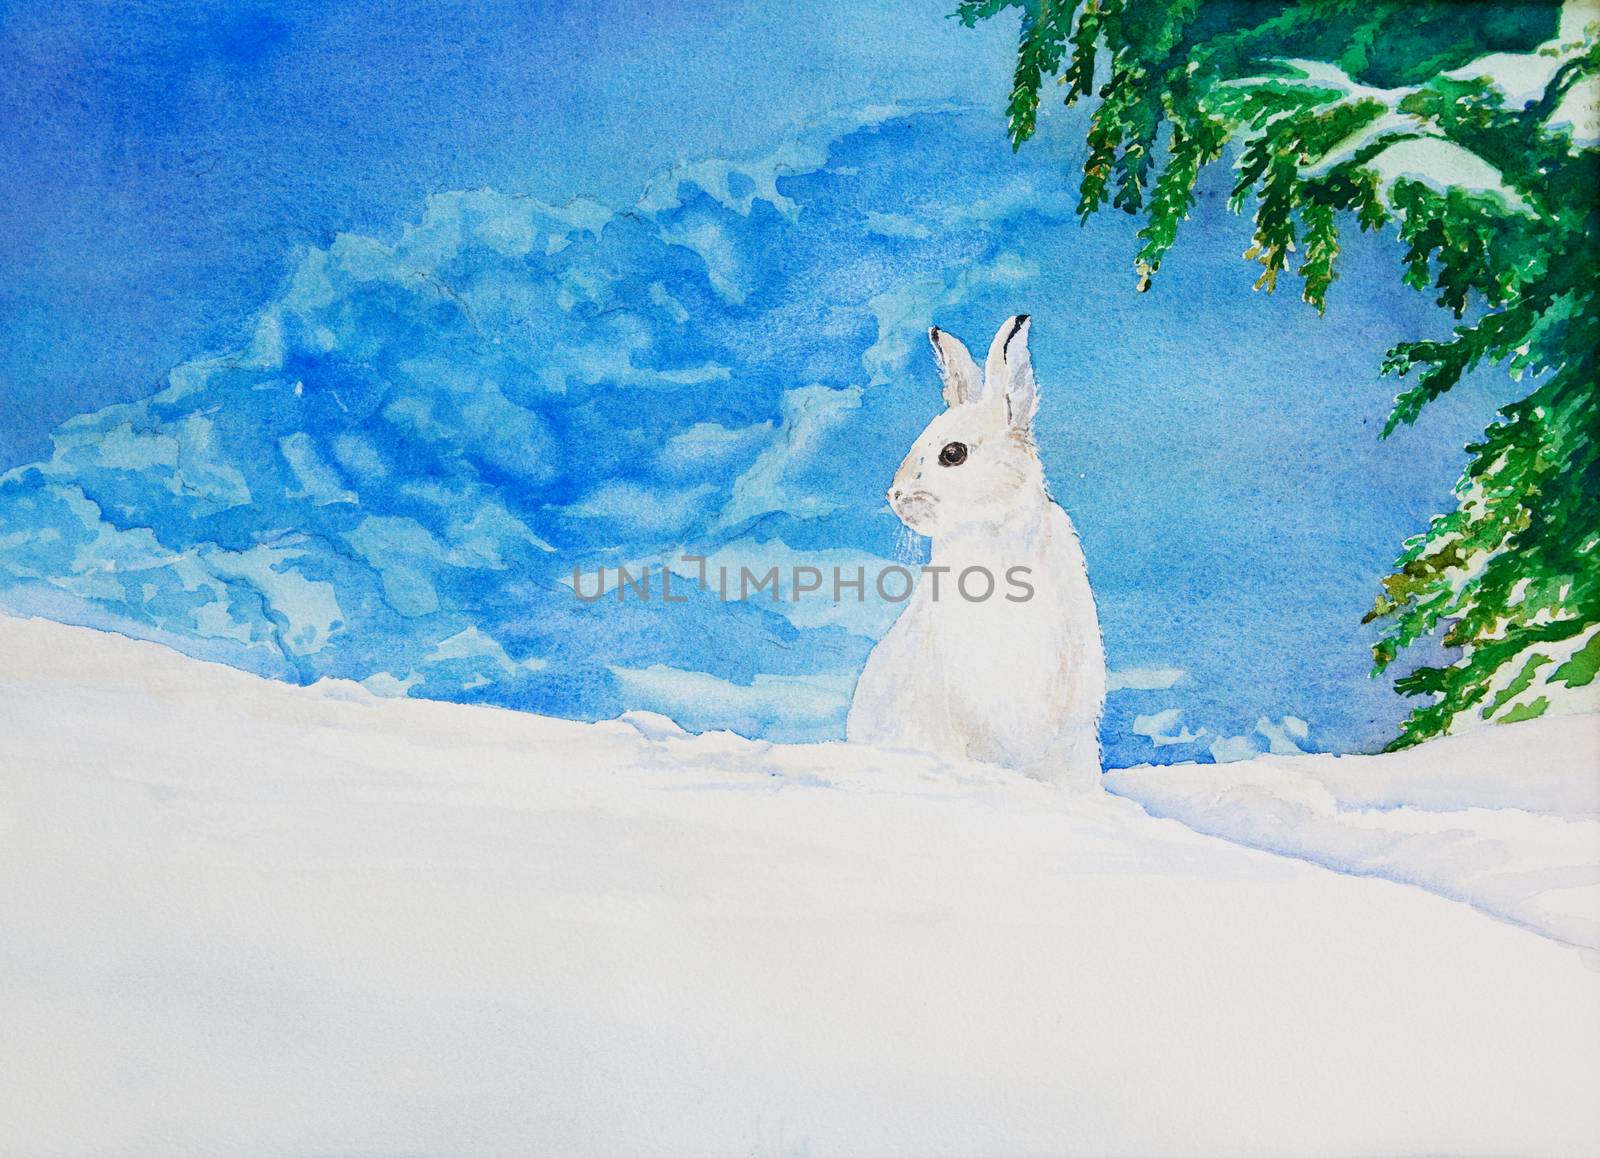 An original watercolor painting of a white rabbit in a snowy, winter landscape.